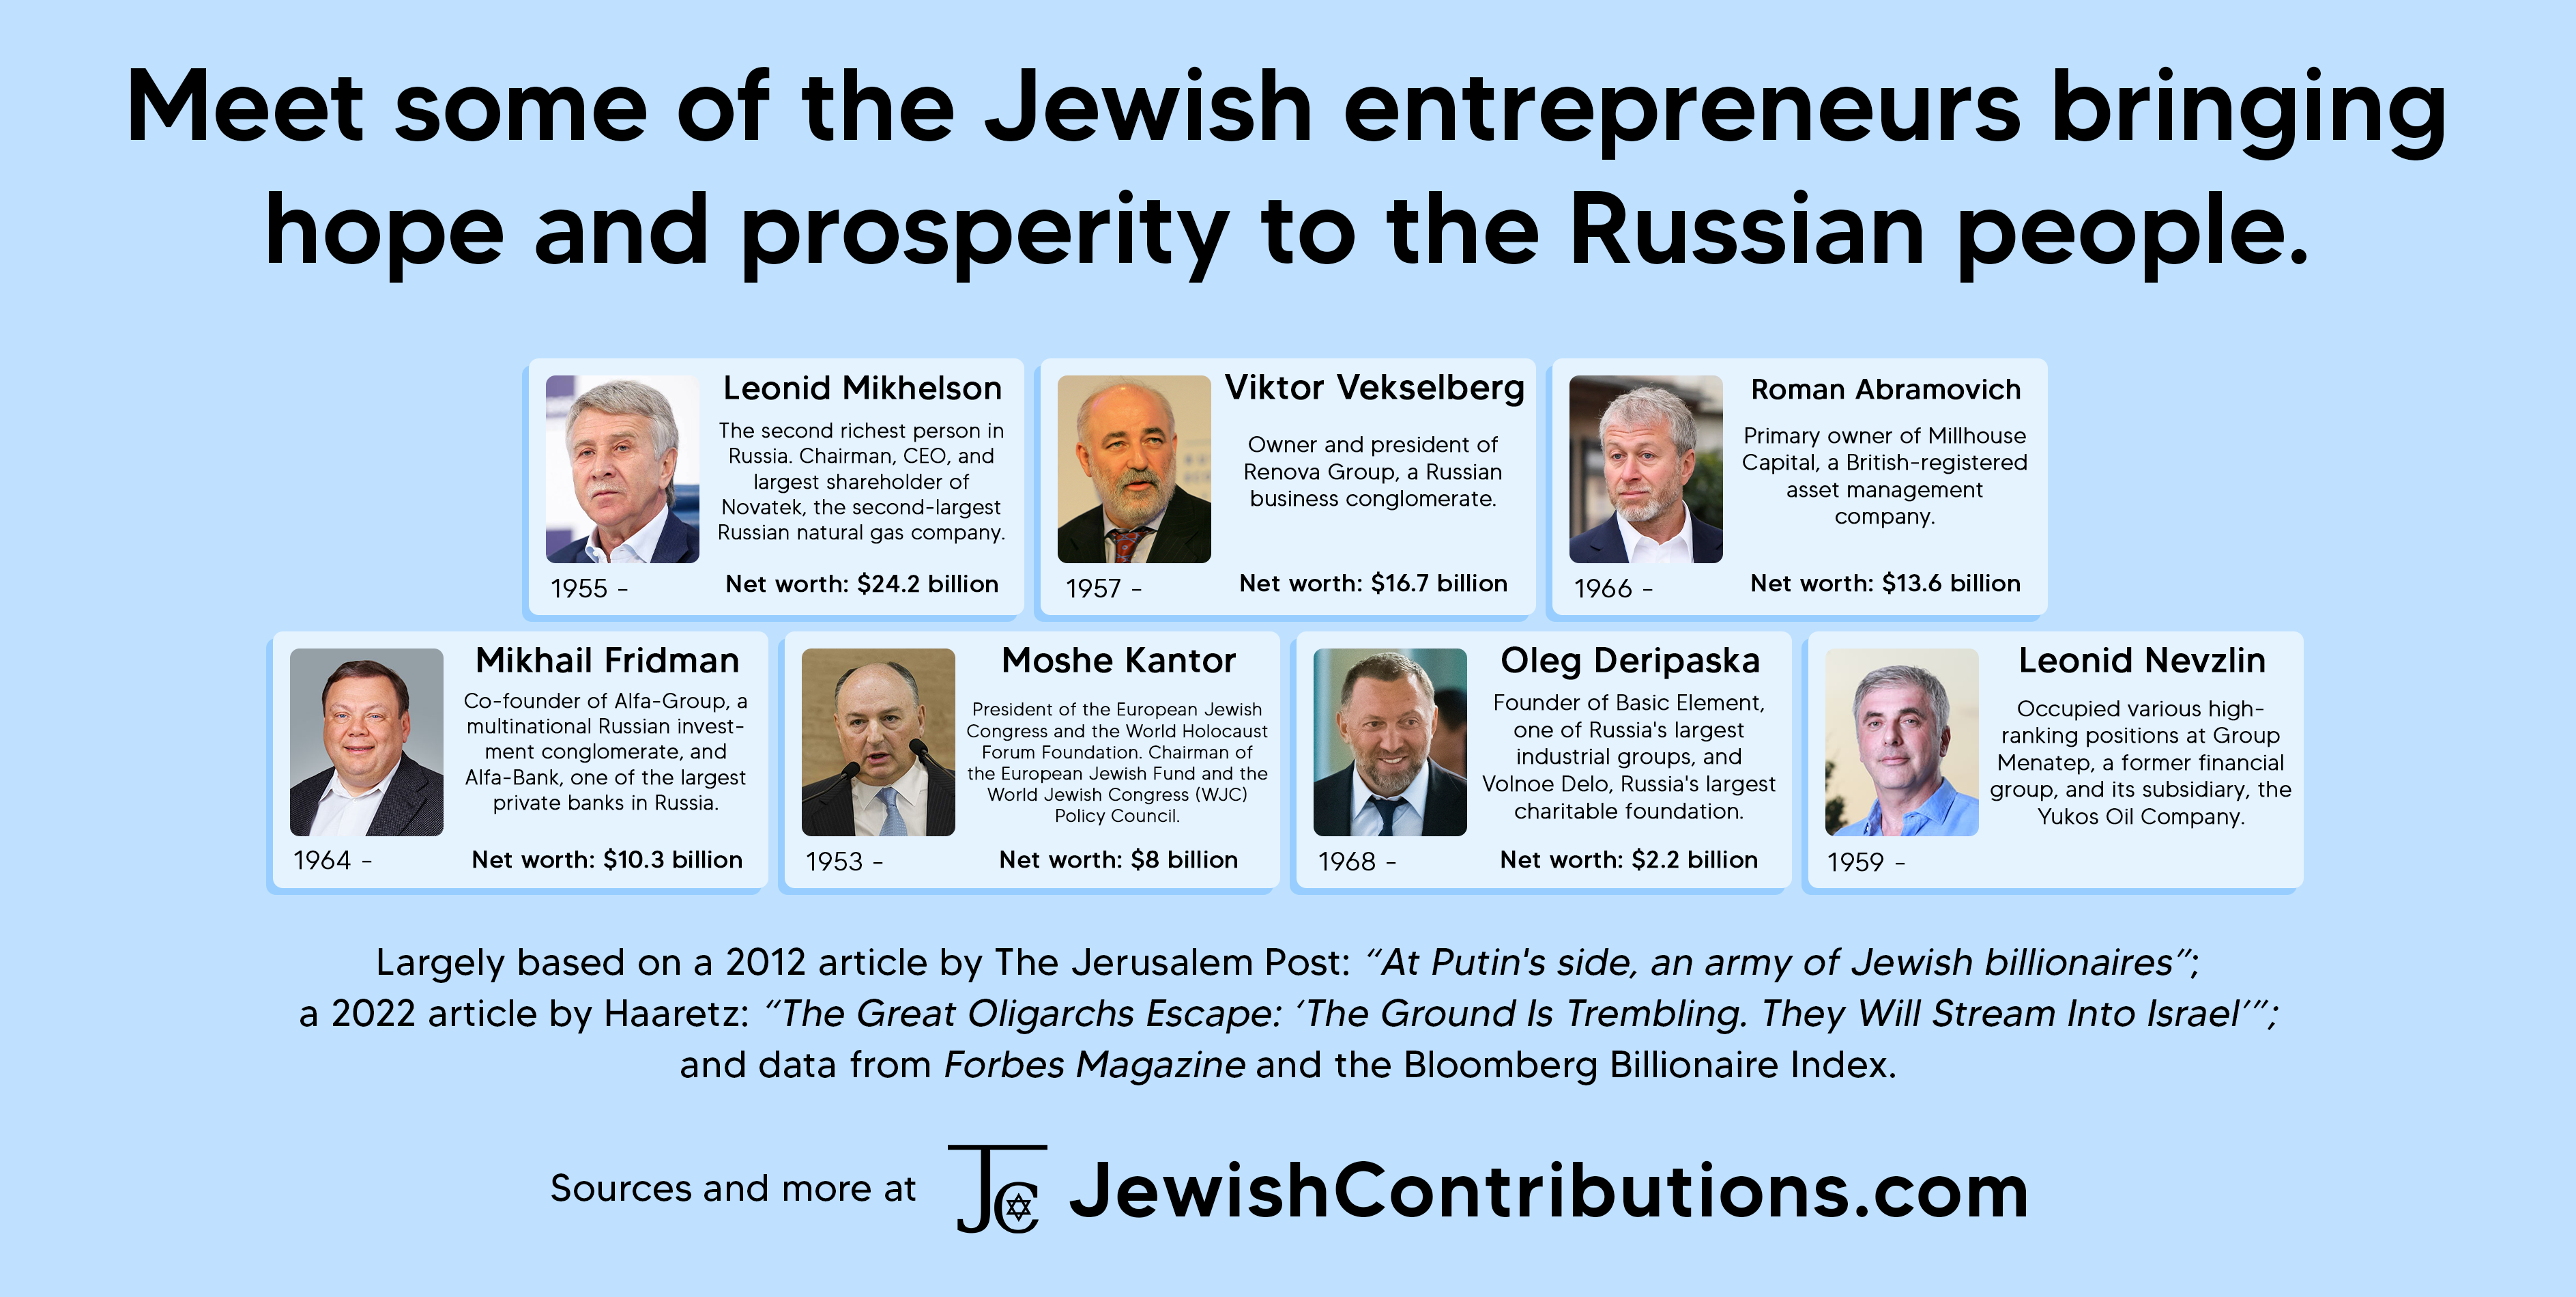 Meet some of the Jewish entrepreneurs bringing hope and prosperity to the Russian people.